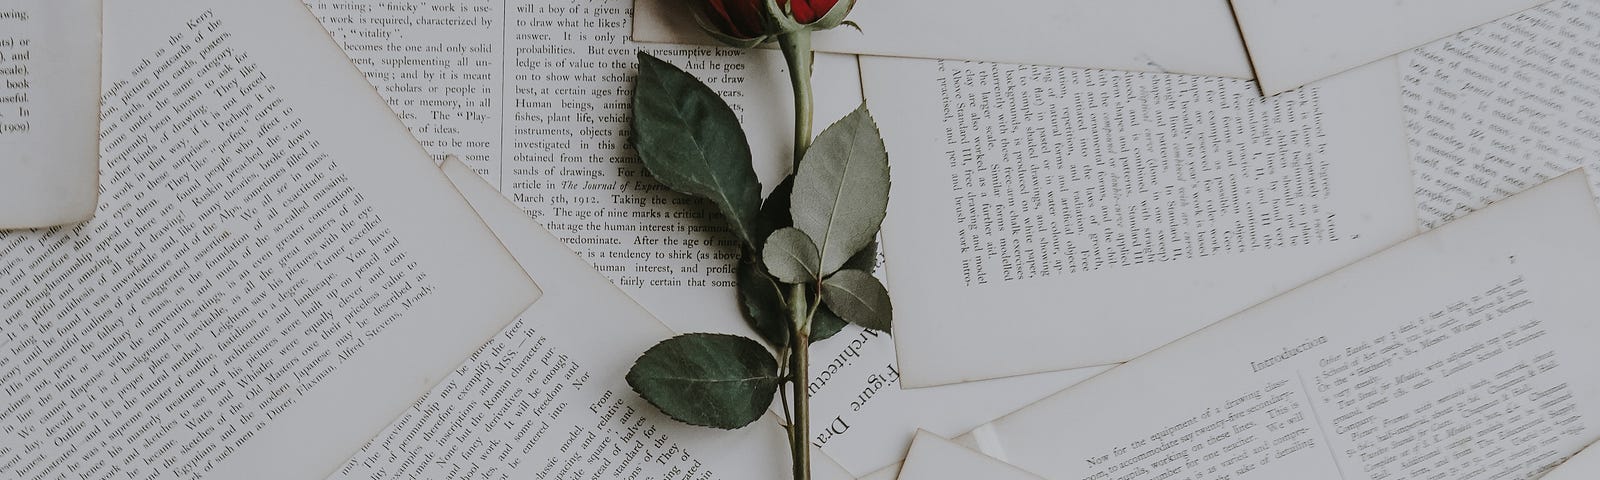 A red rose lying on top of many printed pages.